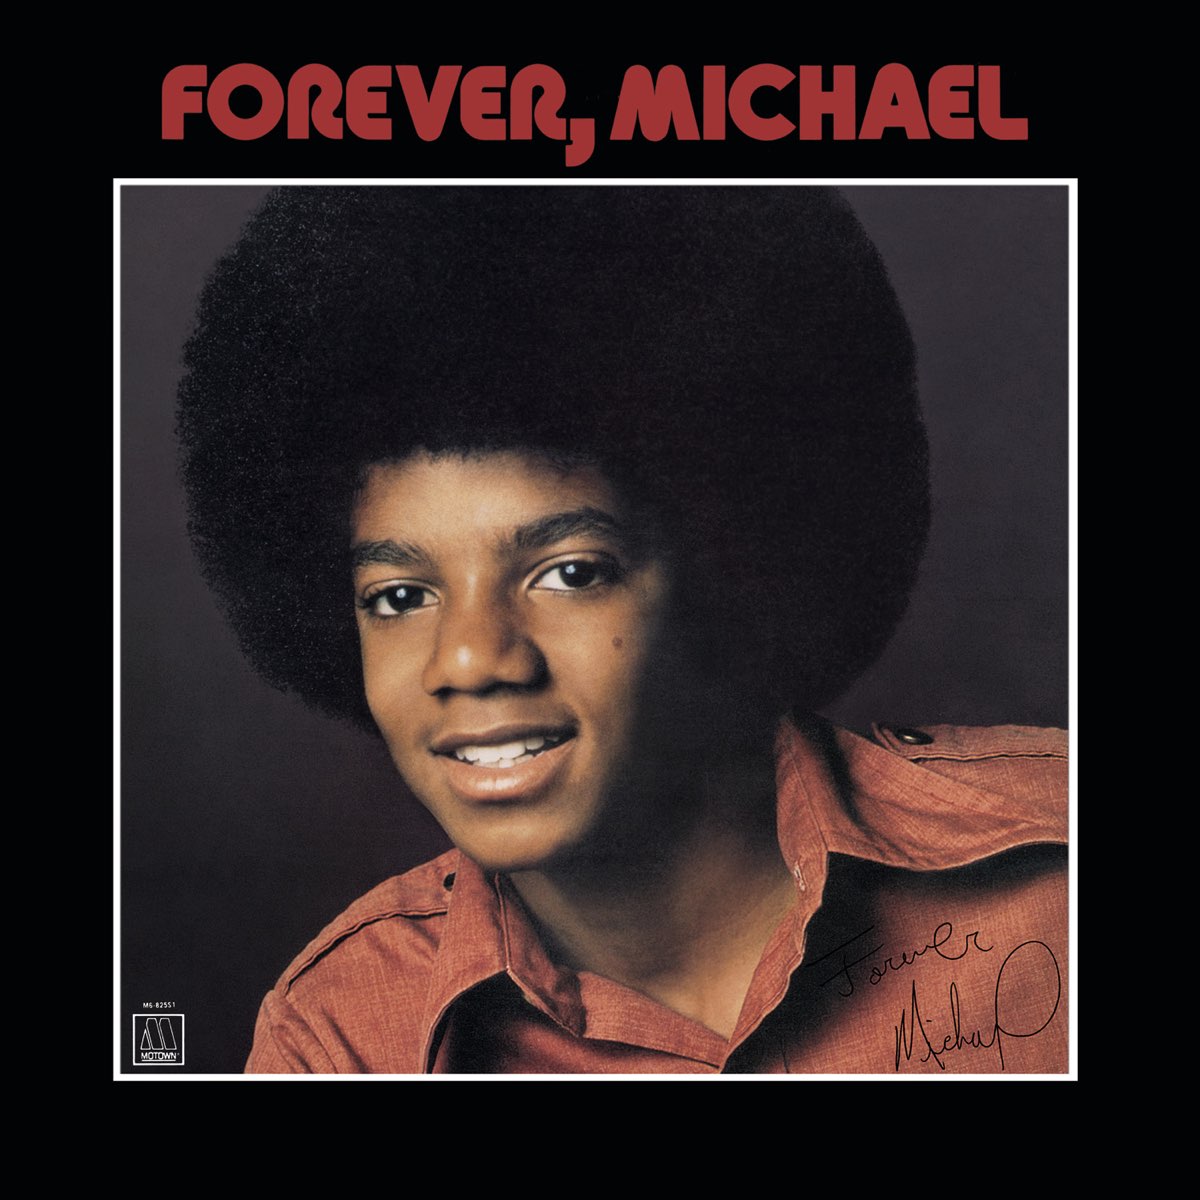 ‎Forever, Michael by Michael Jackson on Apple Music